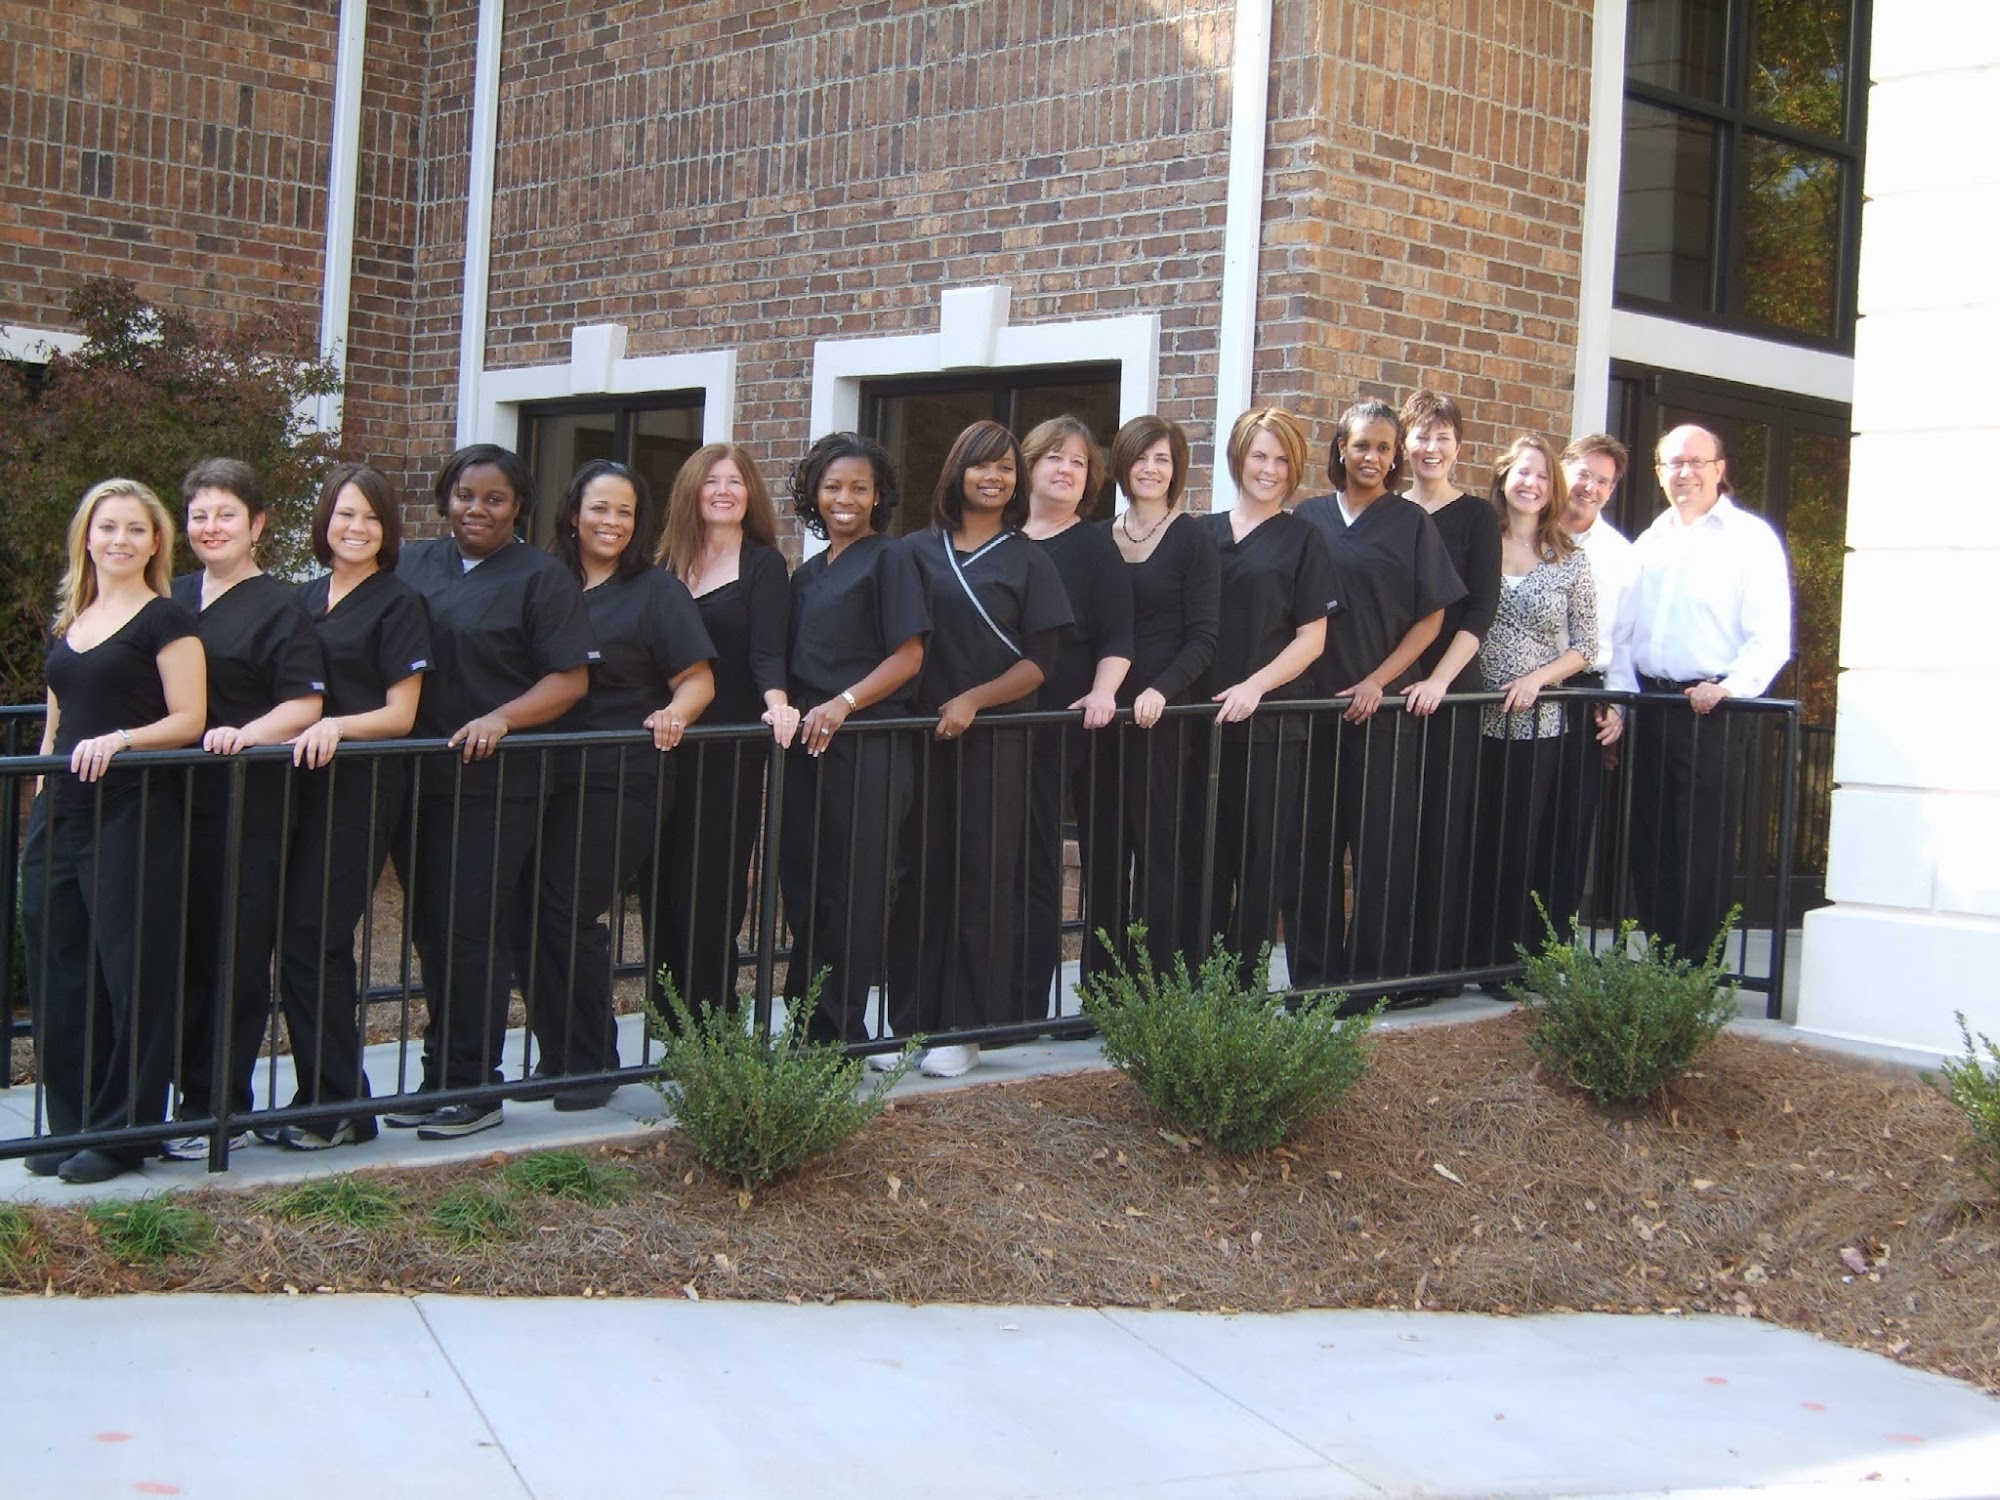 Decatur Family & Cosmetic Dentistry